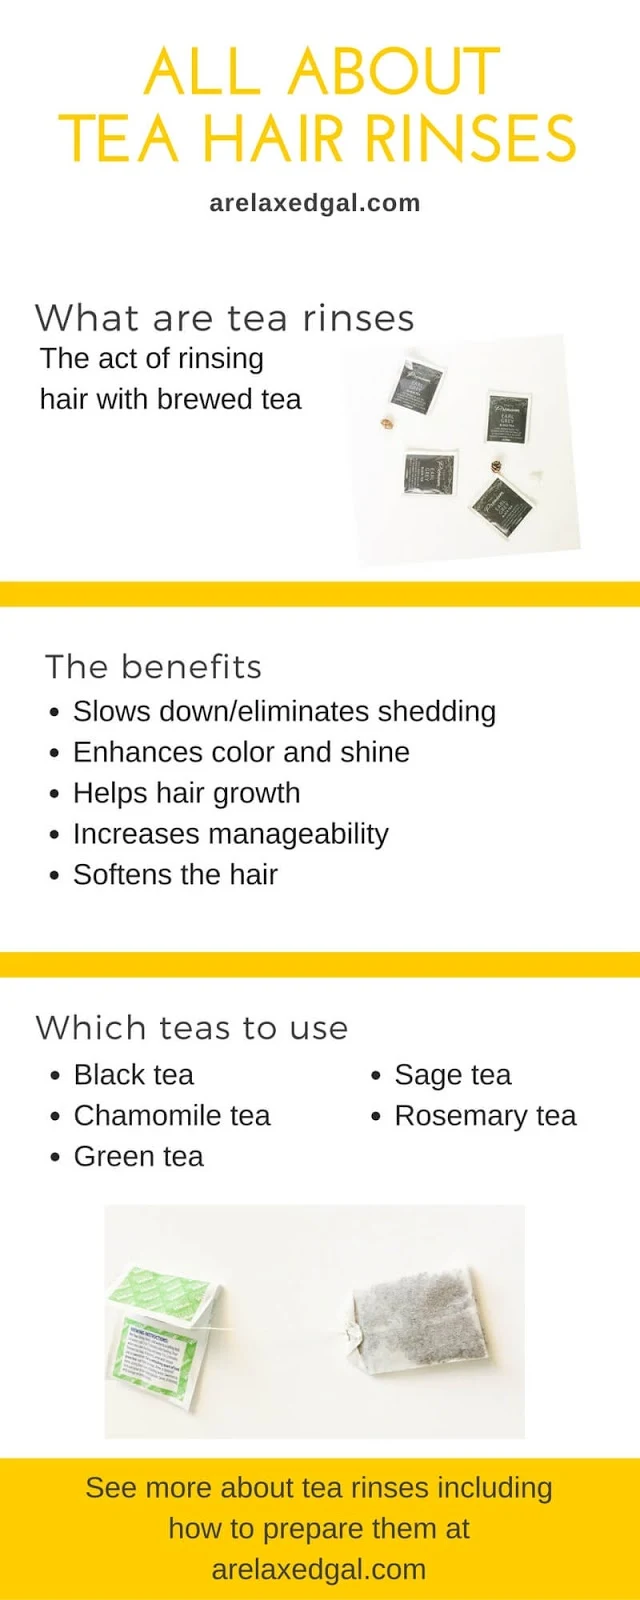 Find out the benefits of doing tea rinses on relaxed hair. | arelaxedgal.com